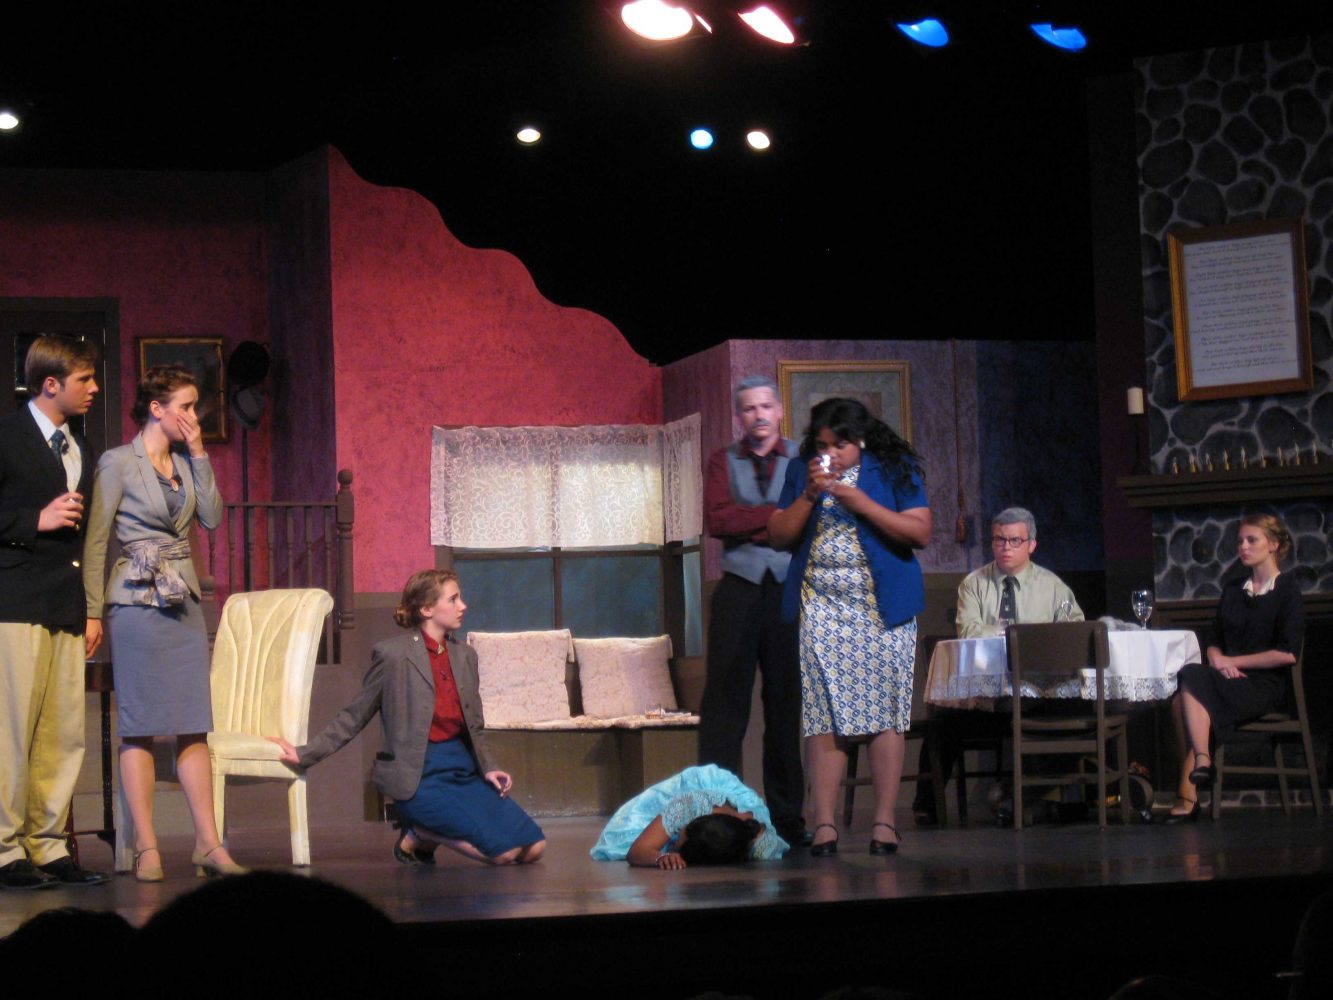 Fall play receives positive turnout on opening night, tickets still available for weekend performances